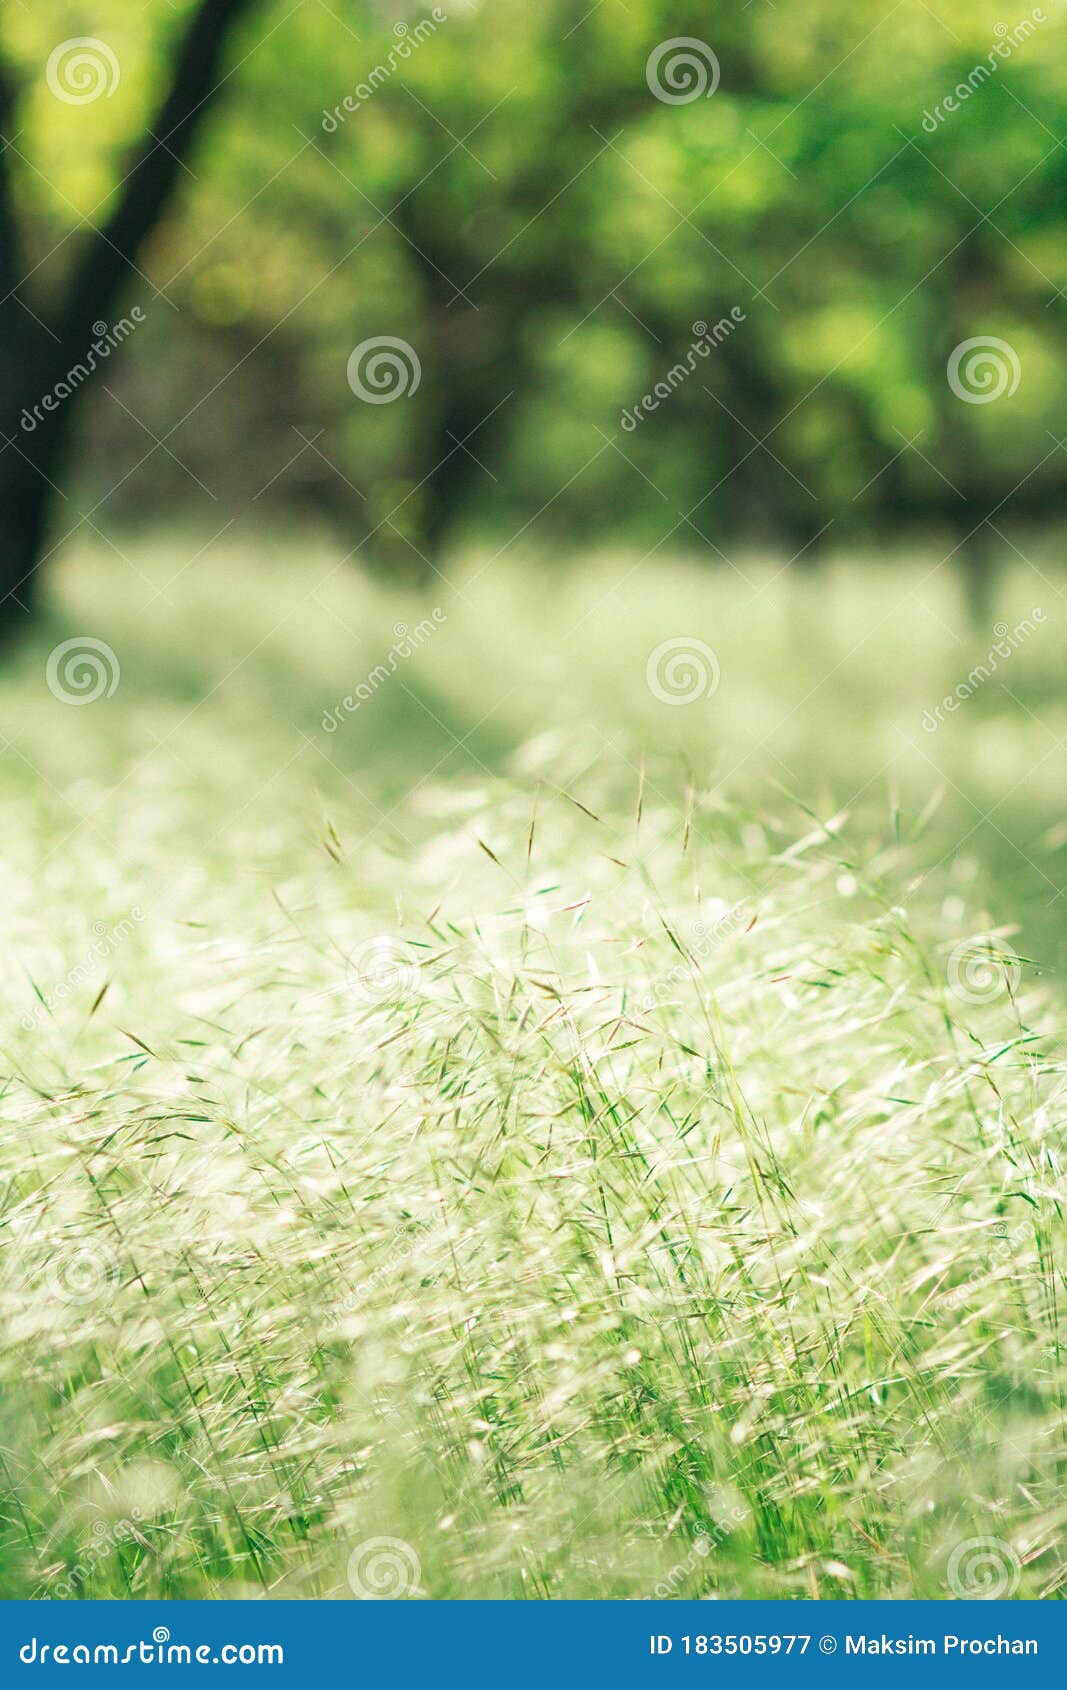 Grass Spikelets on a Sun-drenched Forest Glade on a Blurred Background